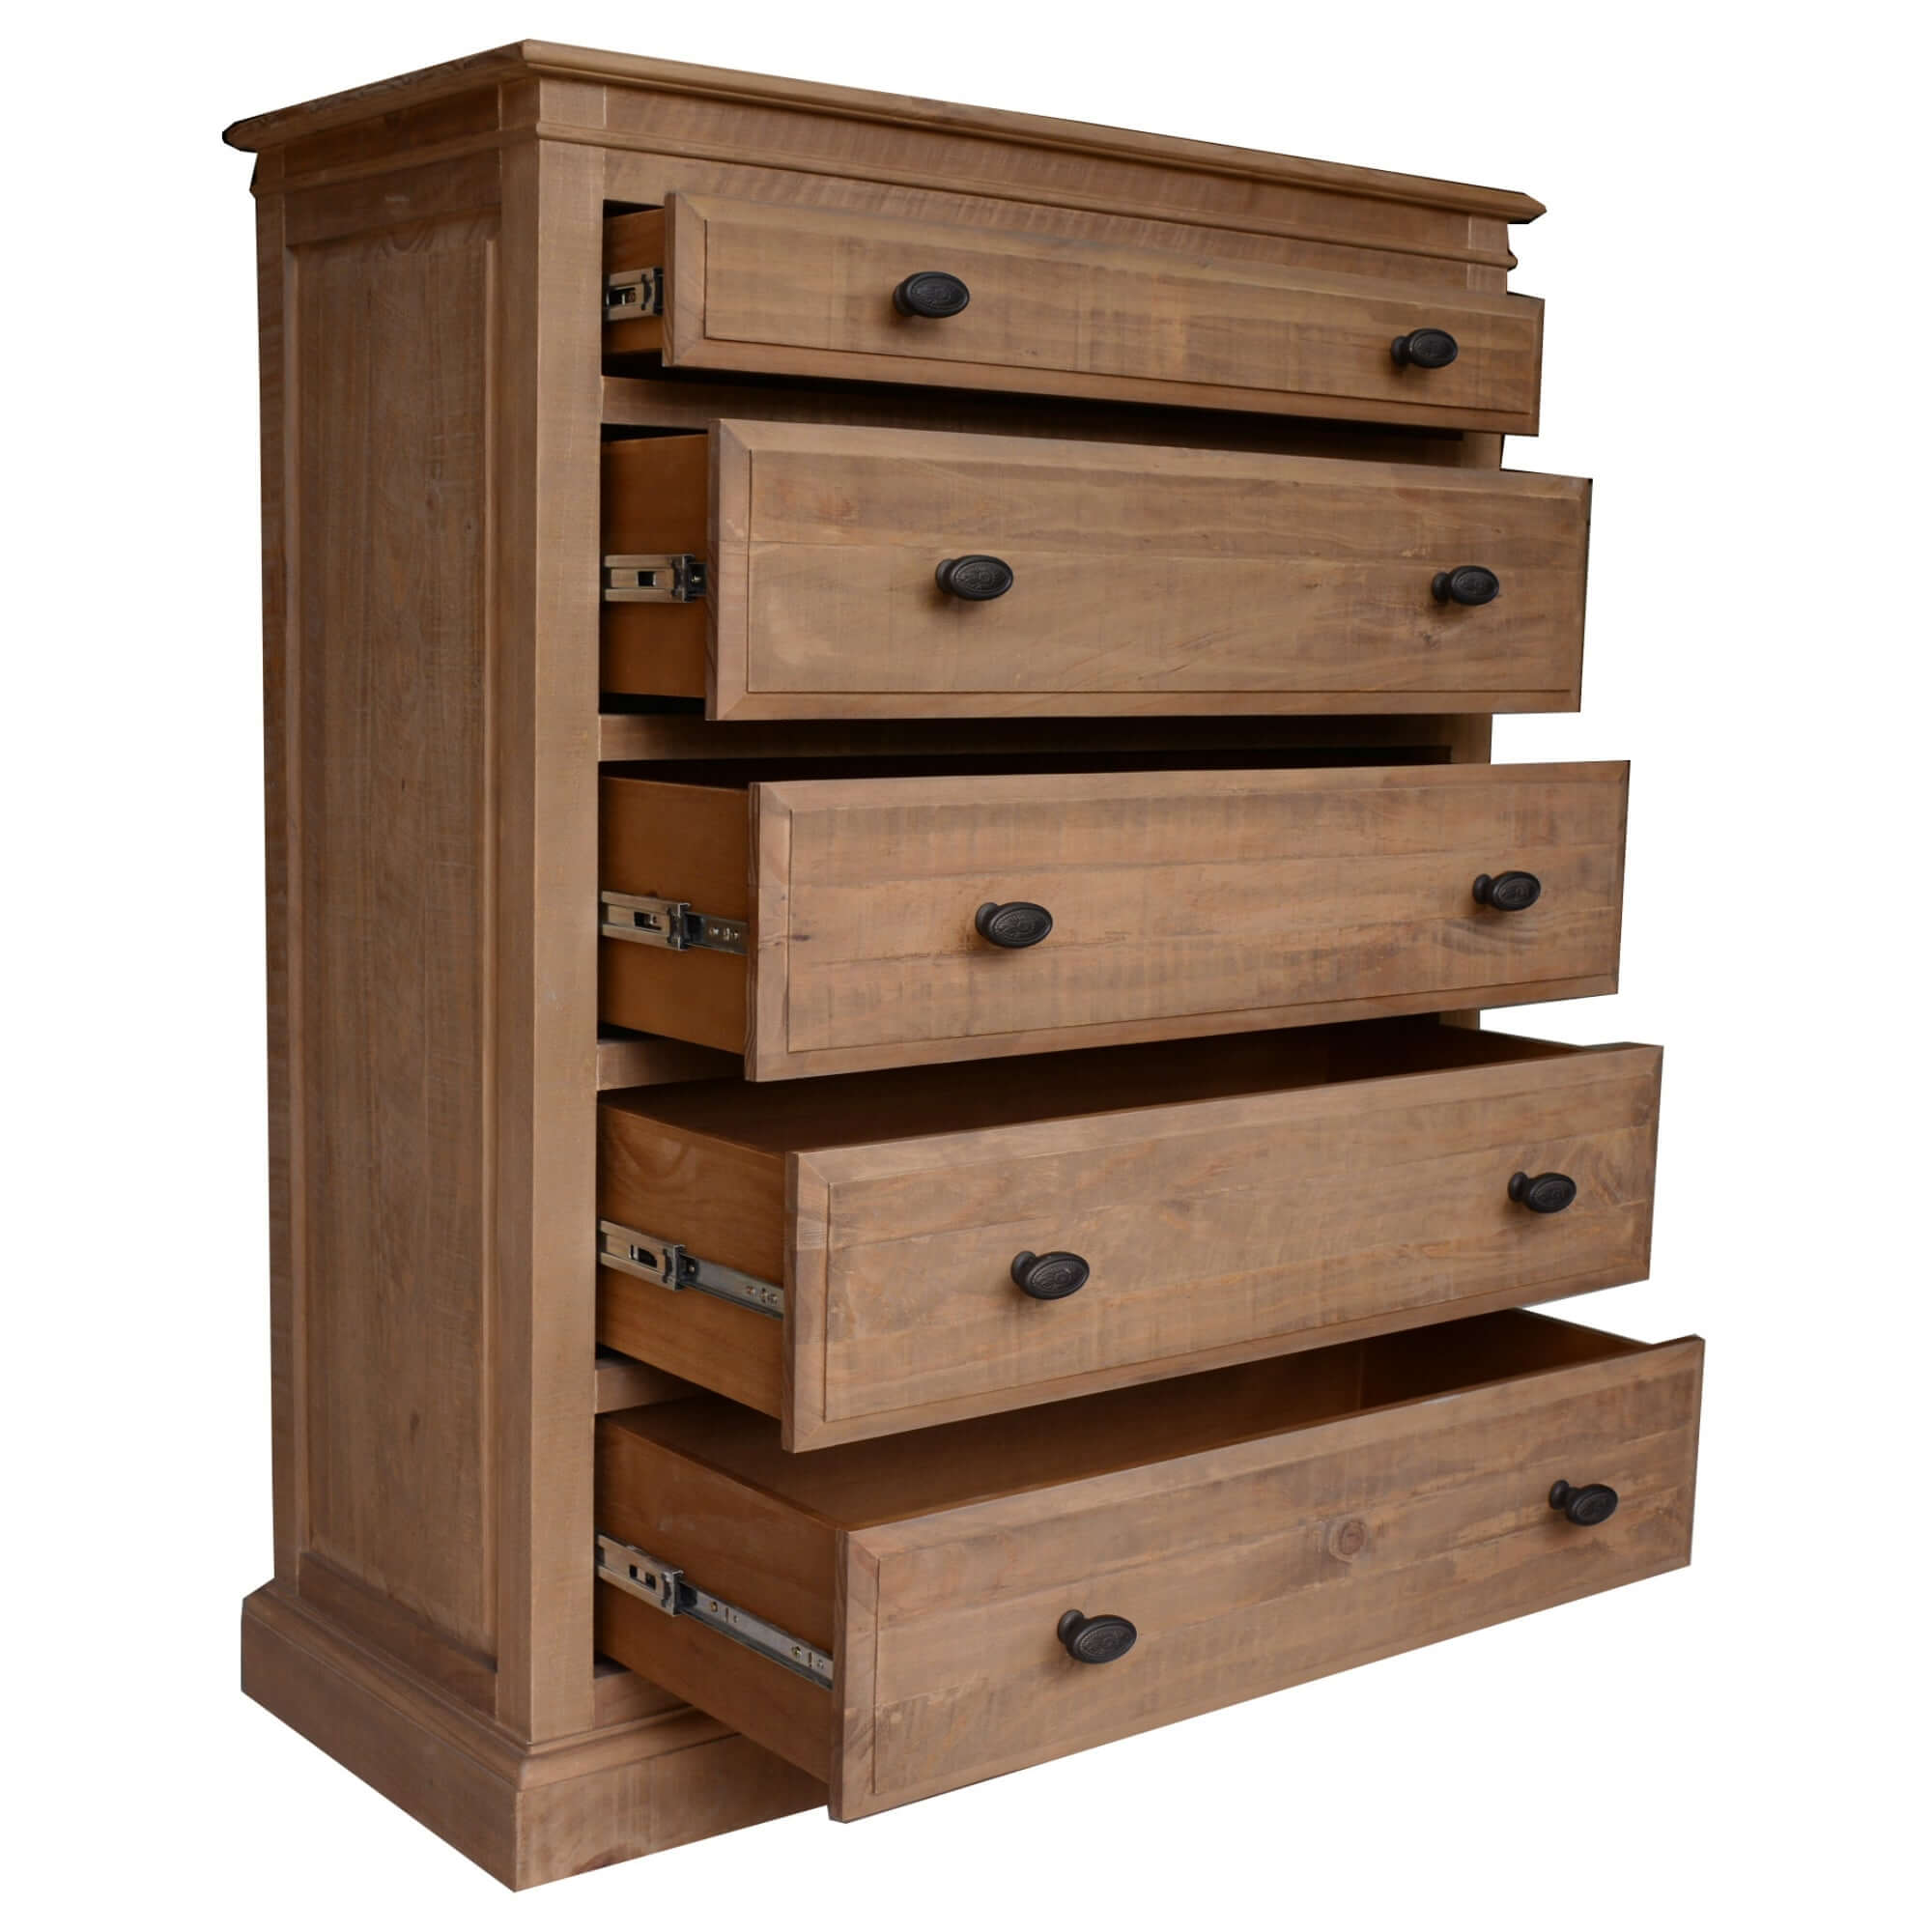 Jade Tallboy 5-Drawer Cabinet - French Provincial Style-Upinteriors